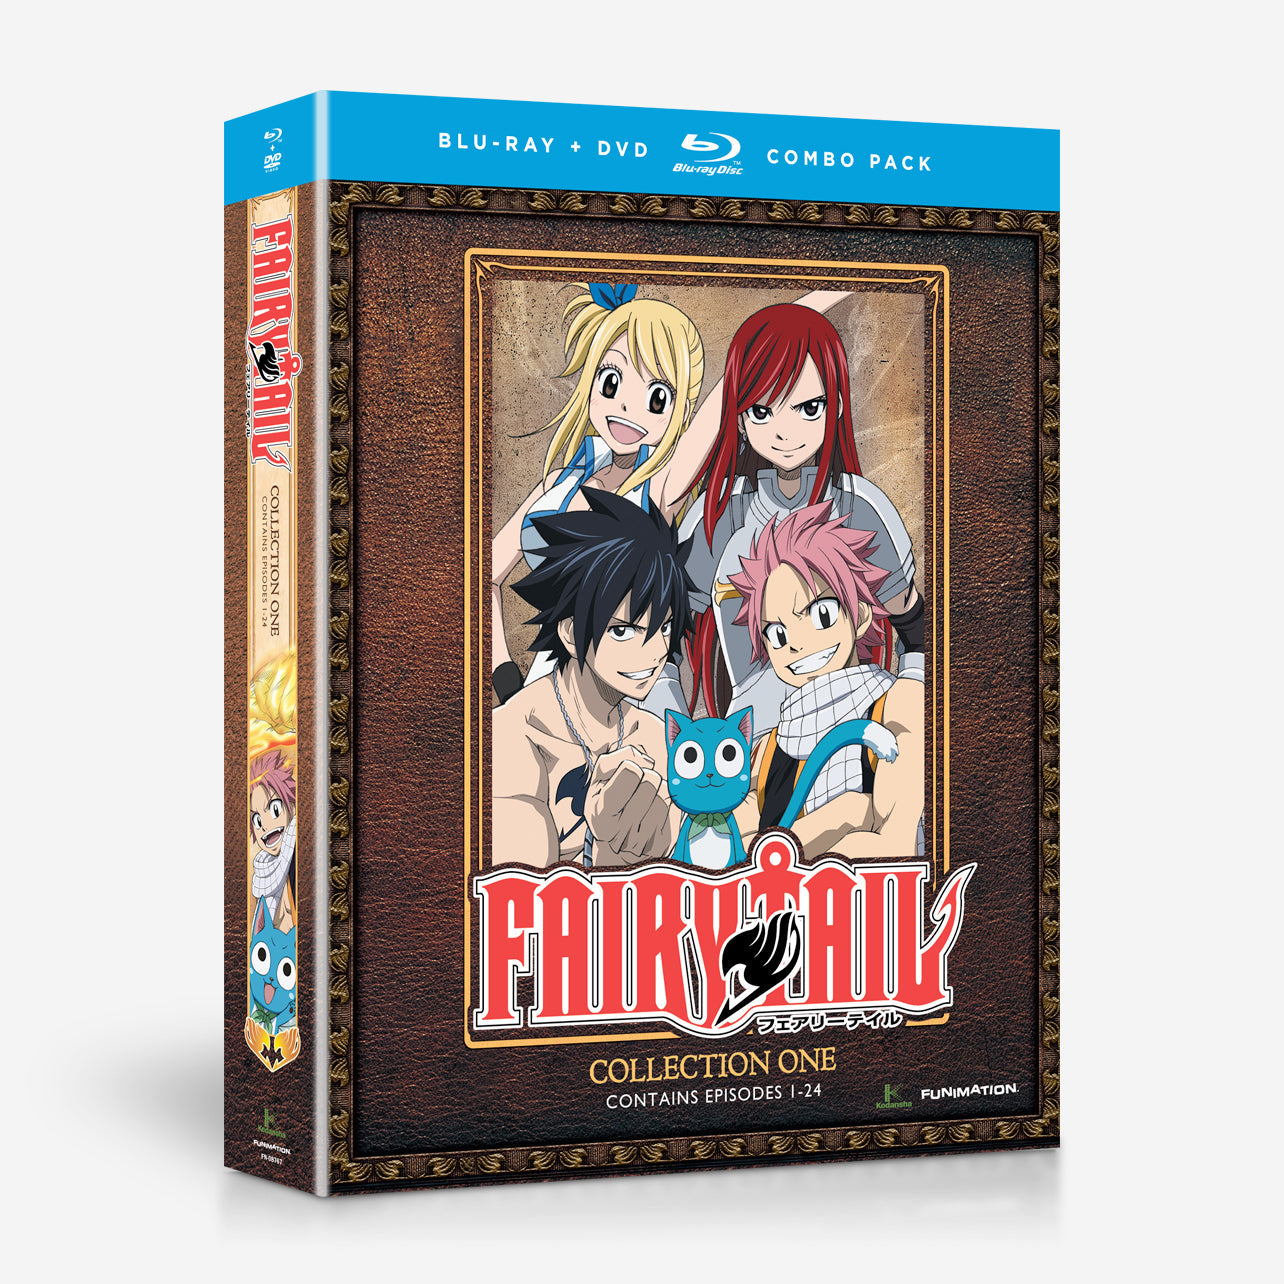 Fairy Tail - Collection 1 - Blu-ray + DVD image count 0